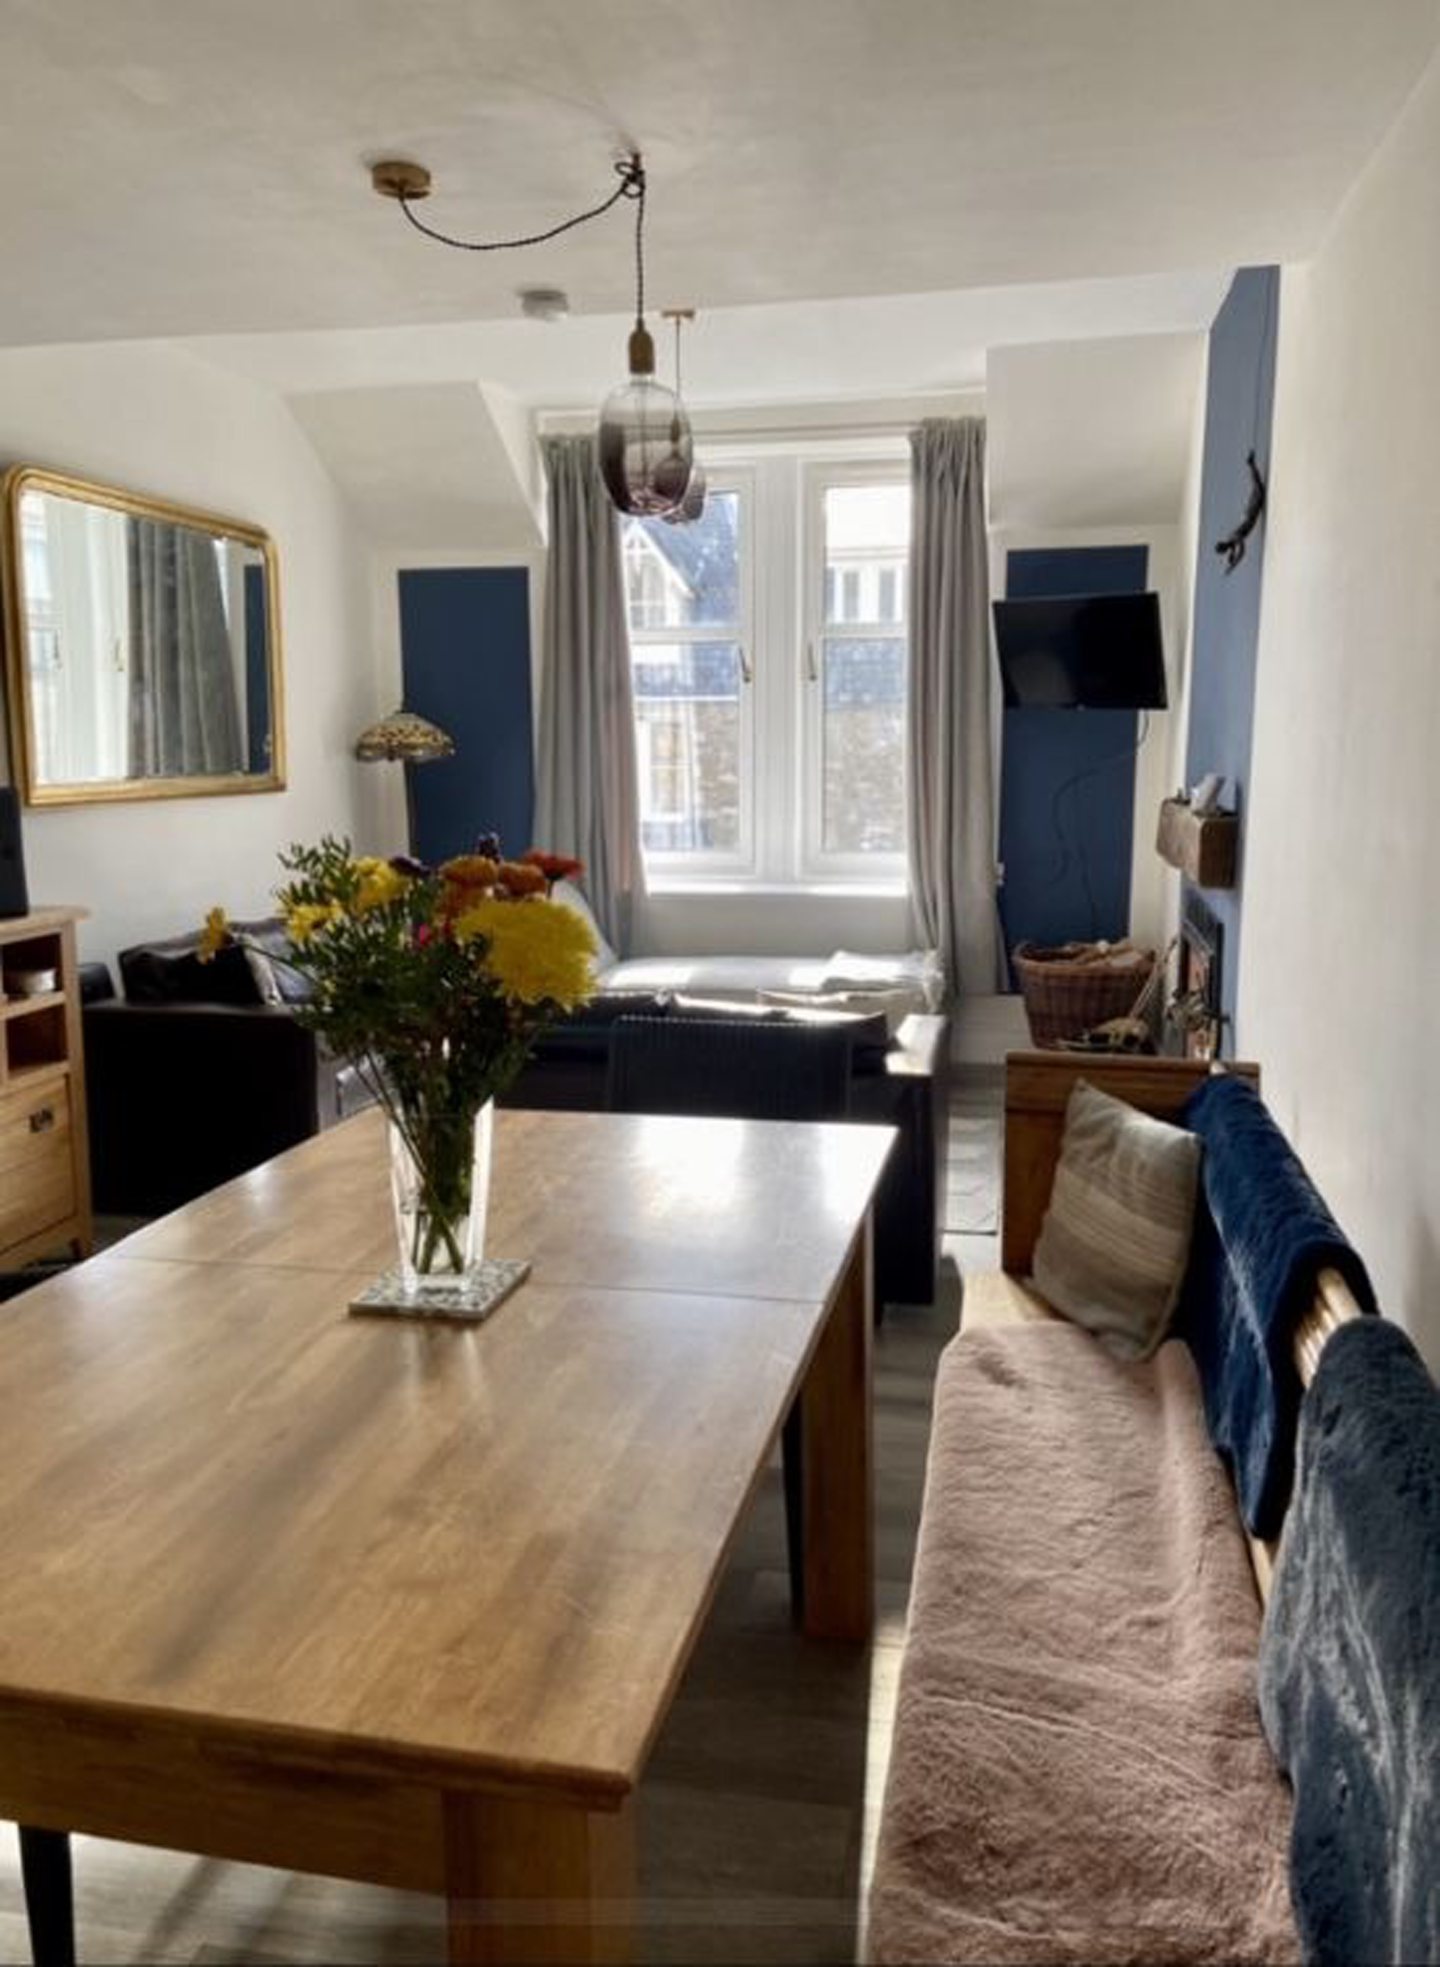 Inside Mairi Laing's flat in Atholl Road, Pitlochry